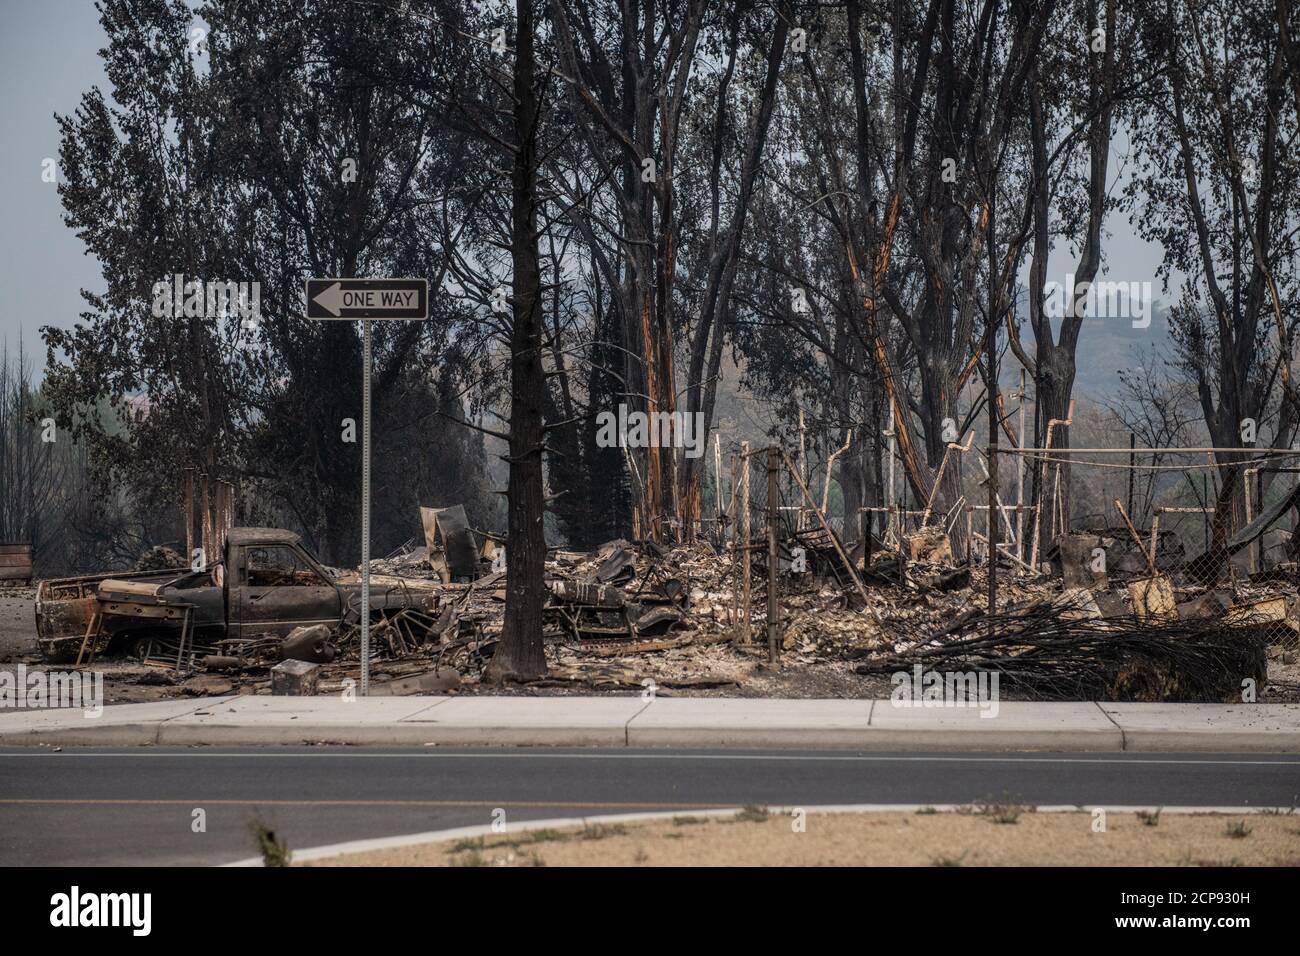 Phoenix, United States. 18th Sep, 2020. PHOENIX, ORE - SEPTEMBER 18, 2020: A general view of the aftermath of the Almeda Fire. The town of Phoenix, Oregon, showing the burned out homes, cars and rubble left behind. In Phoenix, about 20 miles north of the California border, homes were charred beyond recognition. Across the western US, at least 87 wildfires are burning, according to the National Interagency Fire Center. They've torched more than 4.7 million acres -- more than six times the area of Rhode Island. Credit: Chris Tuite/imageSPACE Credit: Imagespace/Alamy Live News Stock Photo